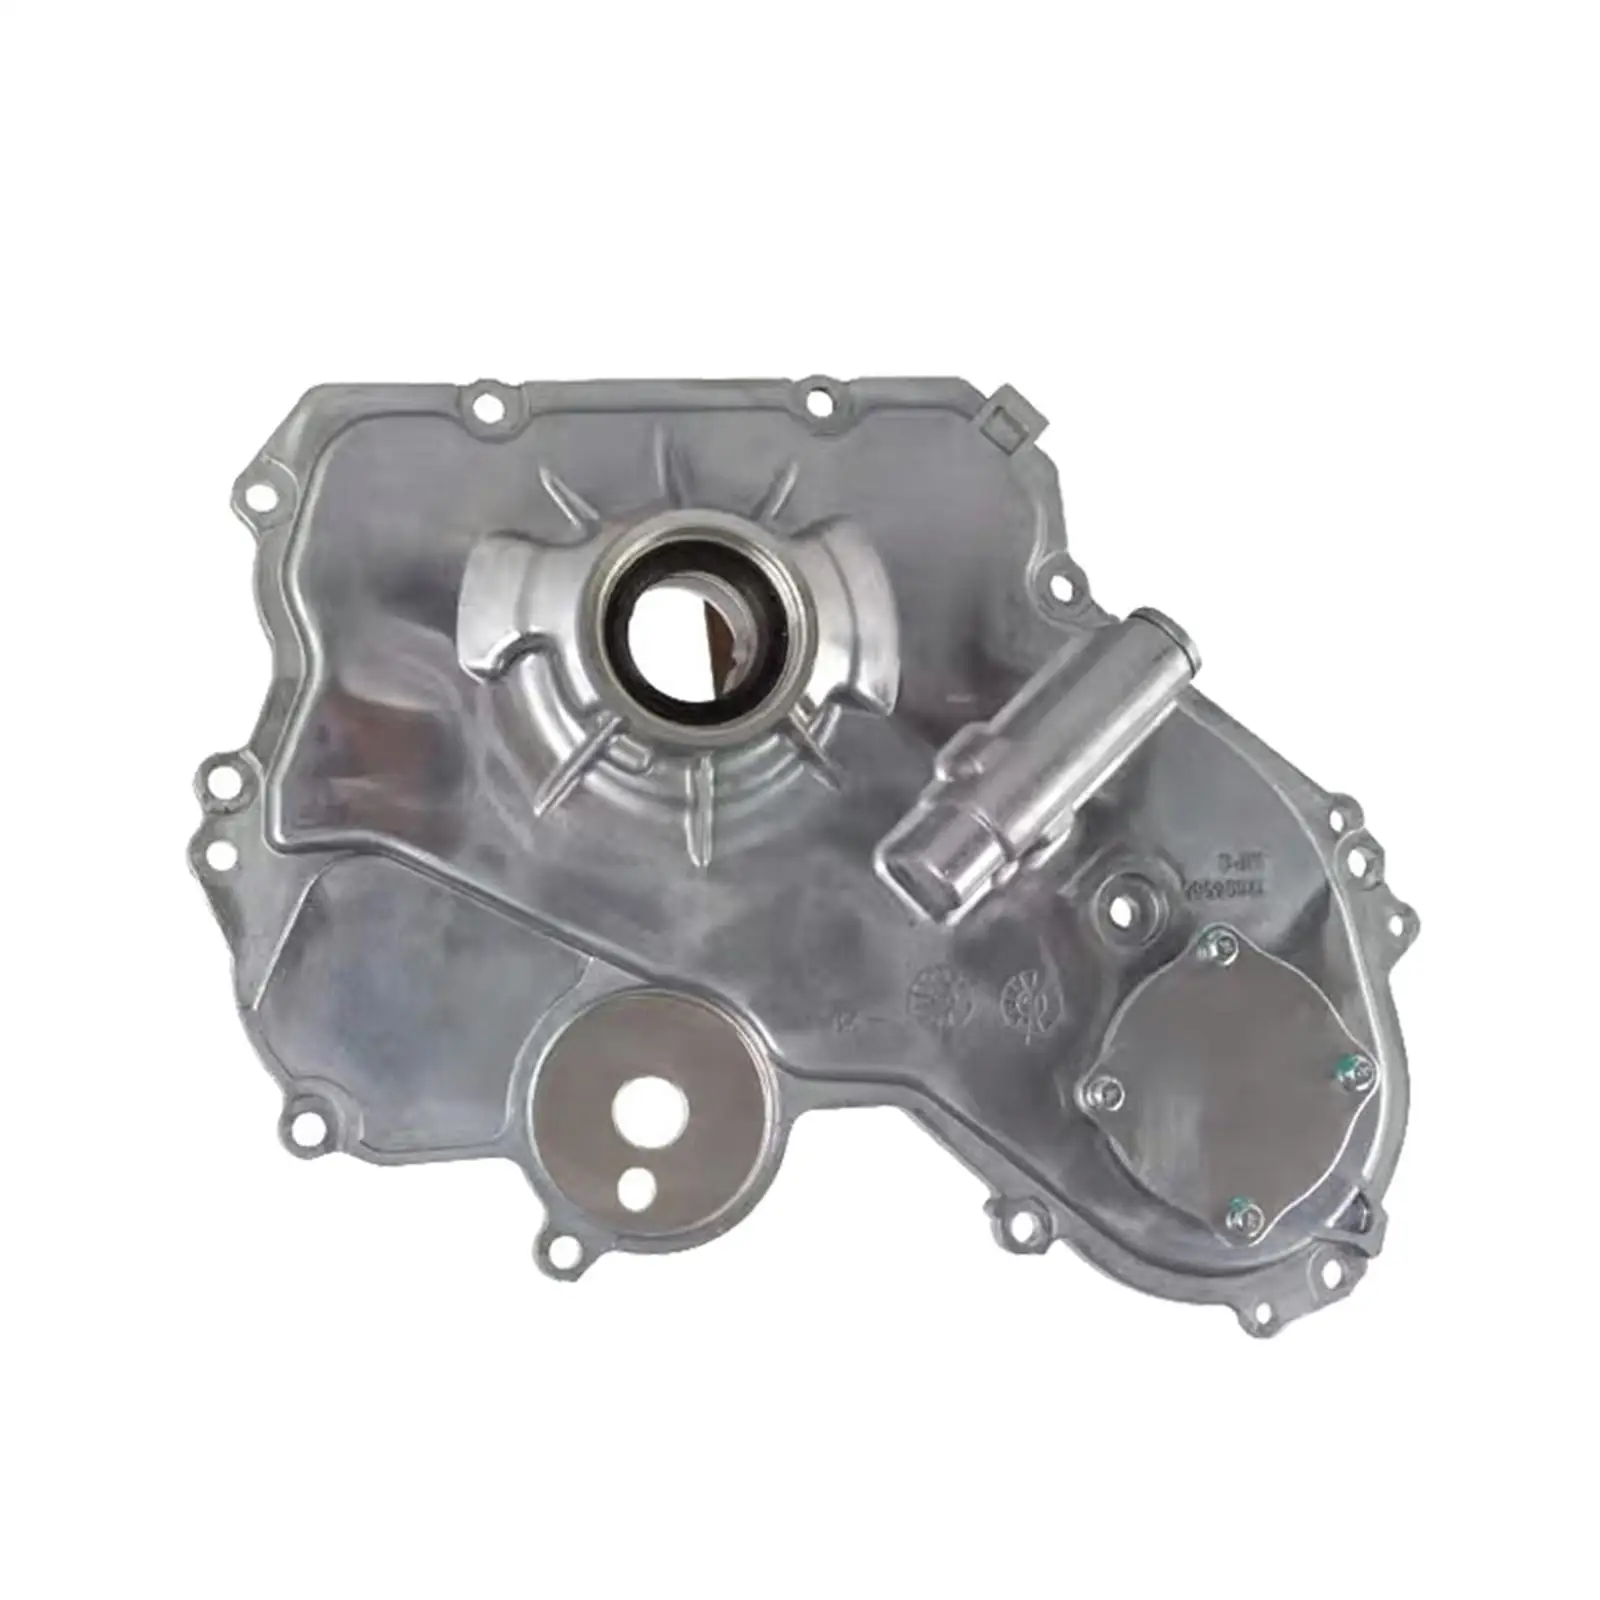 Engine Oil Pump Repair Parts 90537914 12584621 12606580 12637040 for Buick